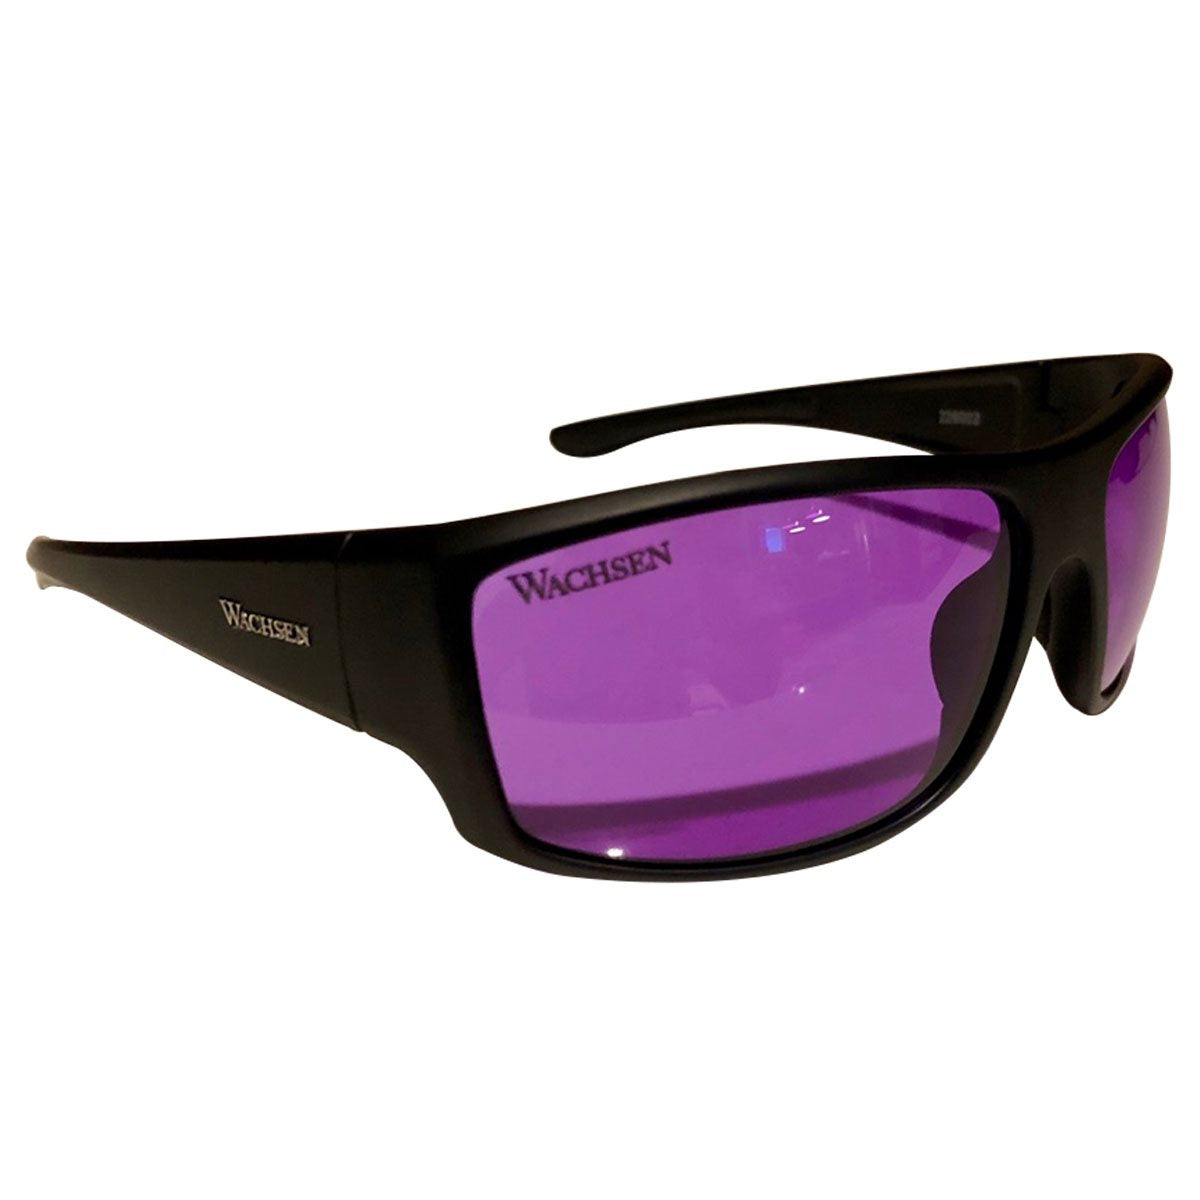 Wachsen Optical ST-9641 with Essilor Lenses